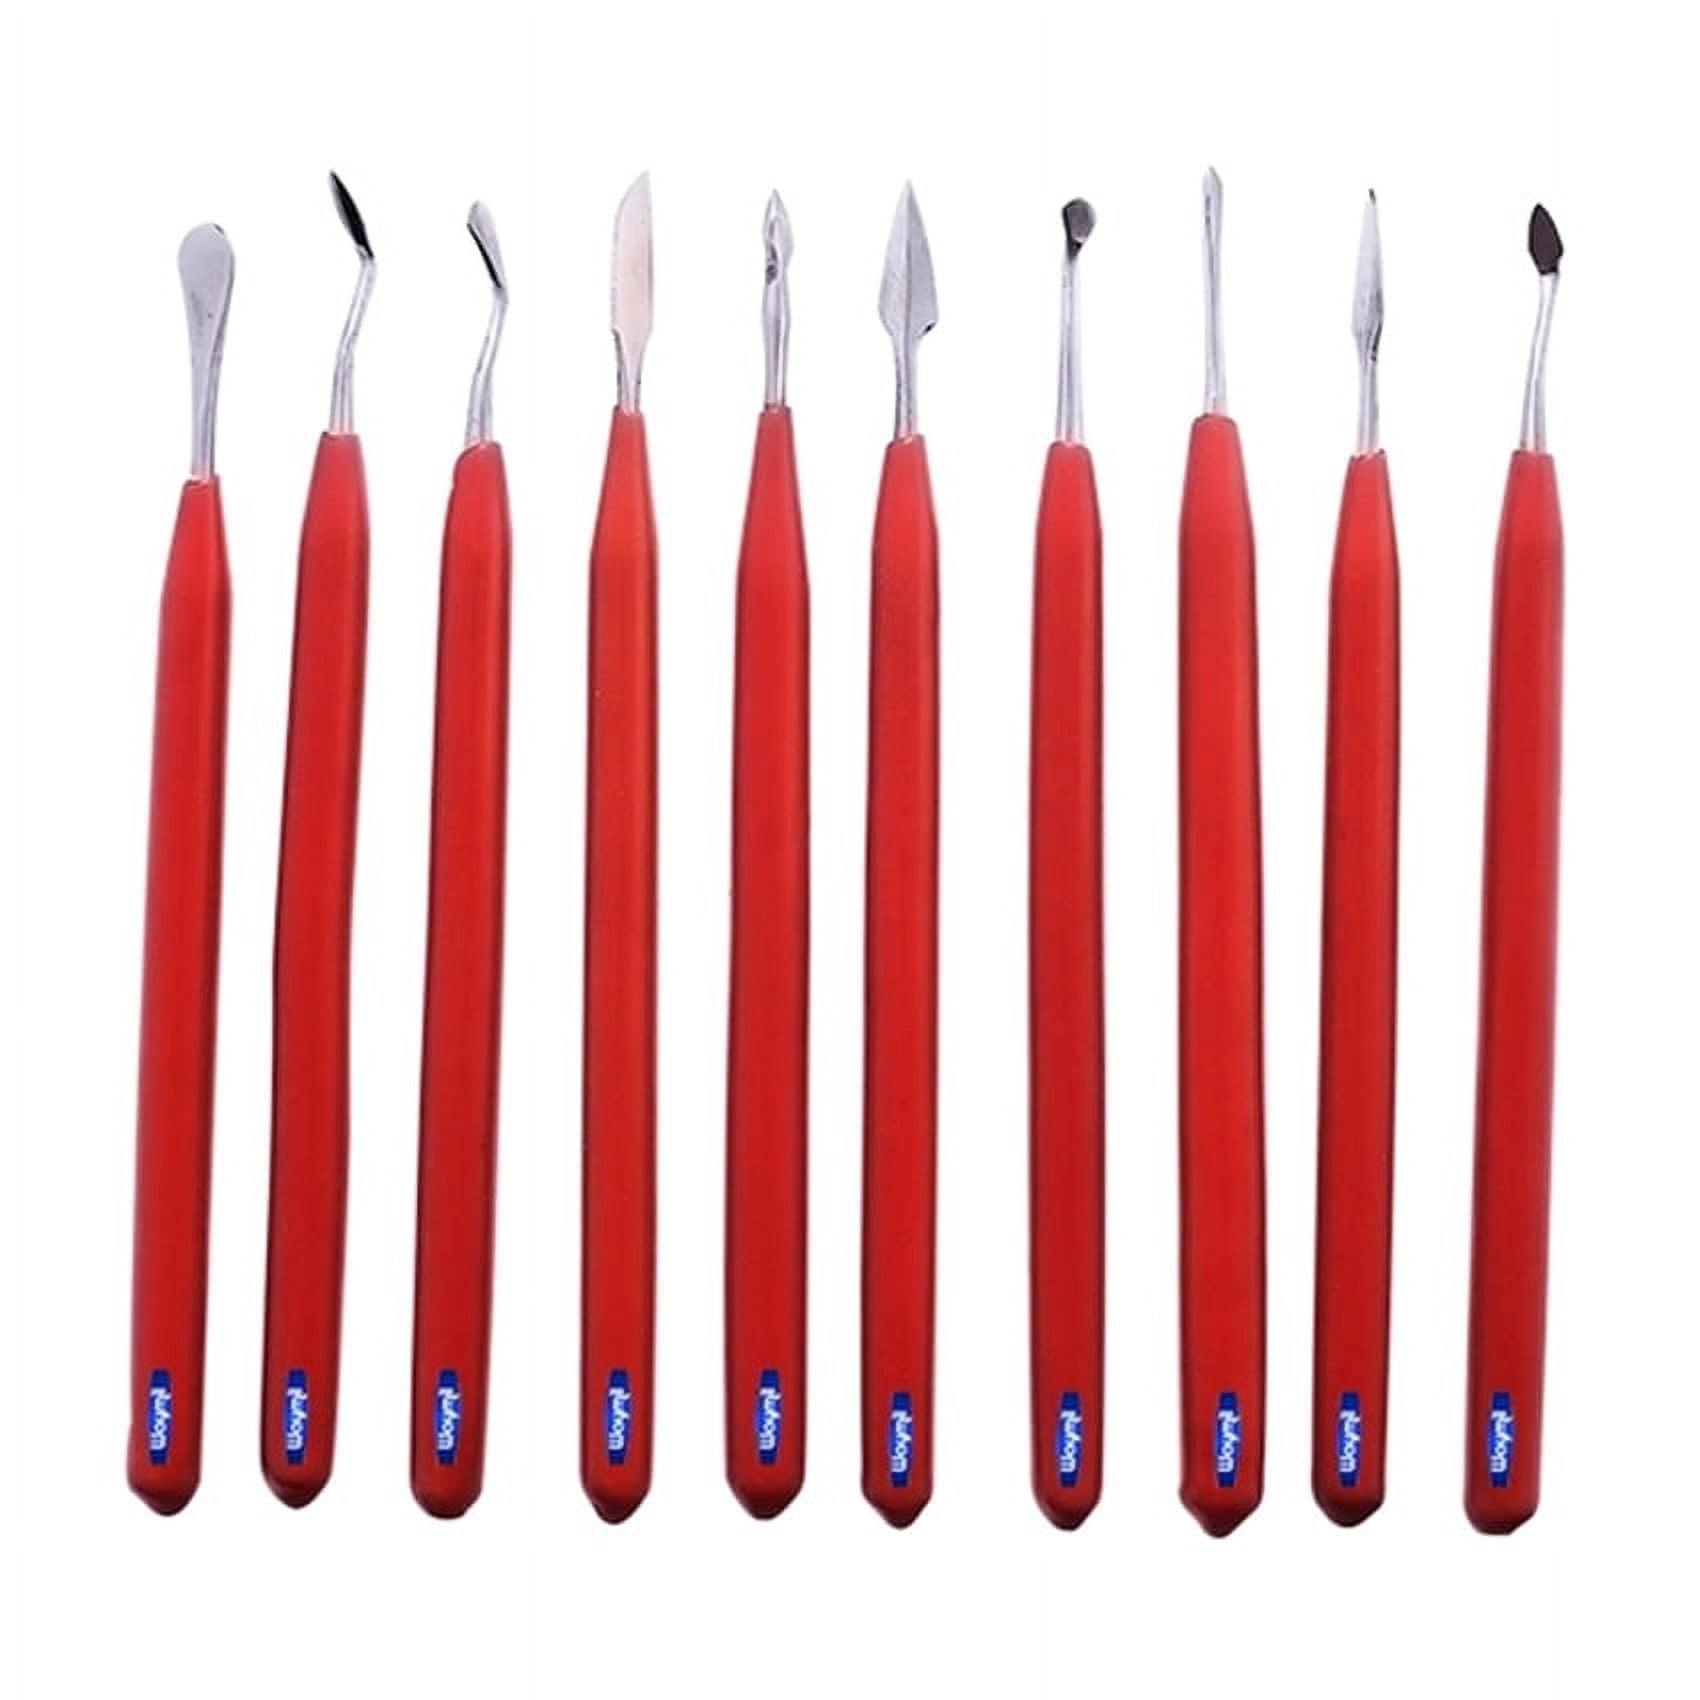 Wax Carving Set of 10 Carvers Tools Jewelry Model Making Candles Sculpting